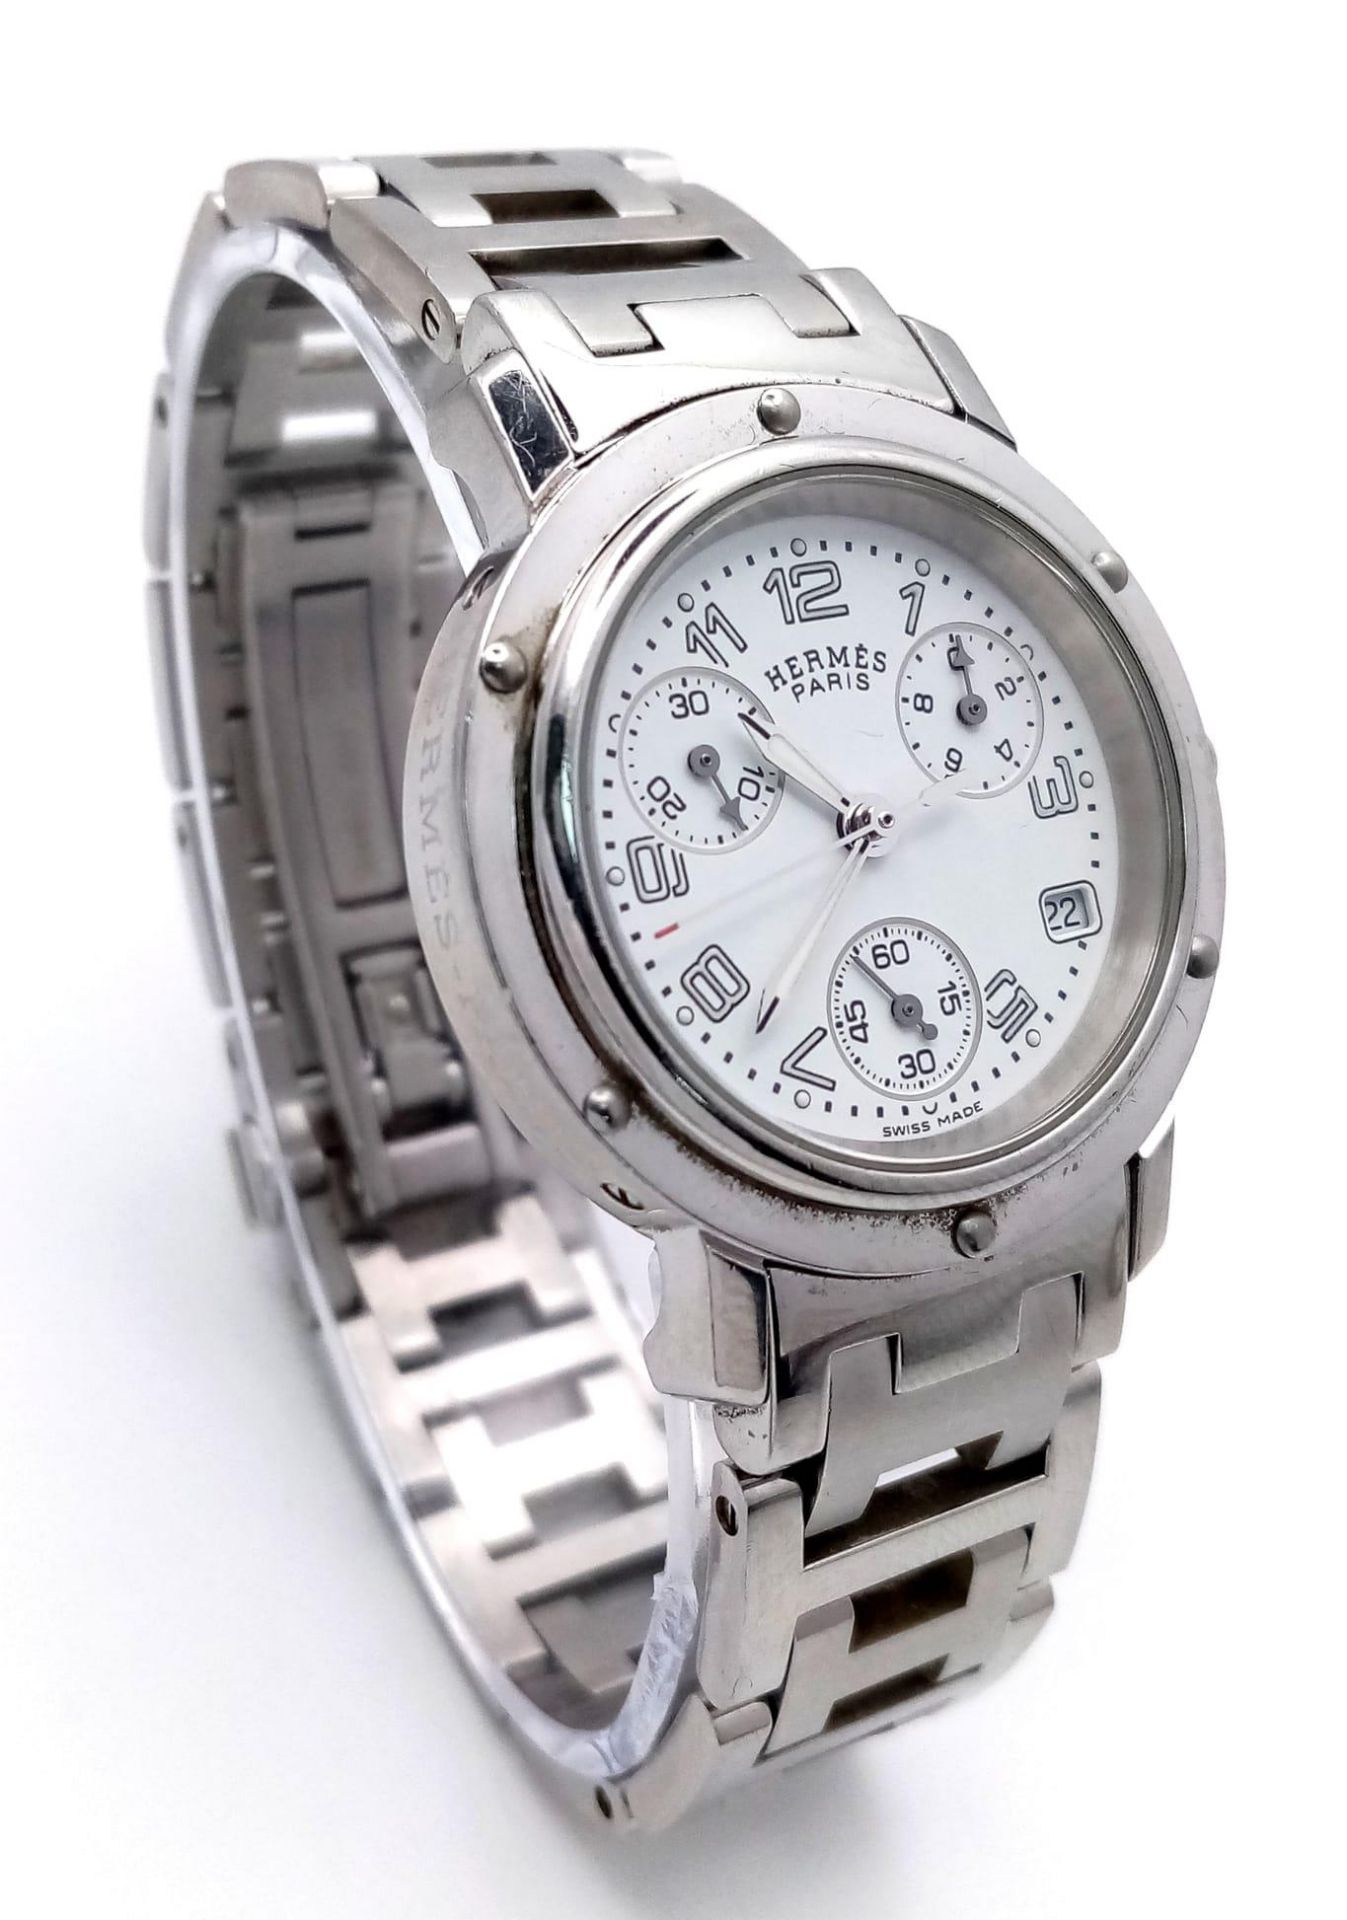 A "HERMES" OF PARIS STAINLESS STEEL CHRONOGRAPH LADIES WATCH WITH 3 SUBDIALS , DATE BOX AND WHITE - Image 2 of 8